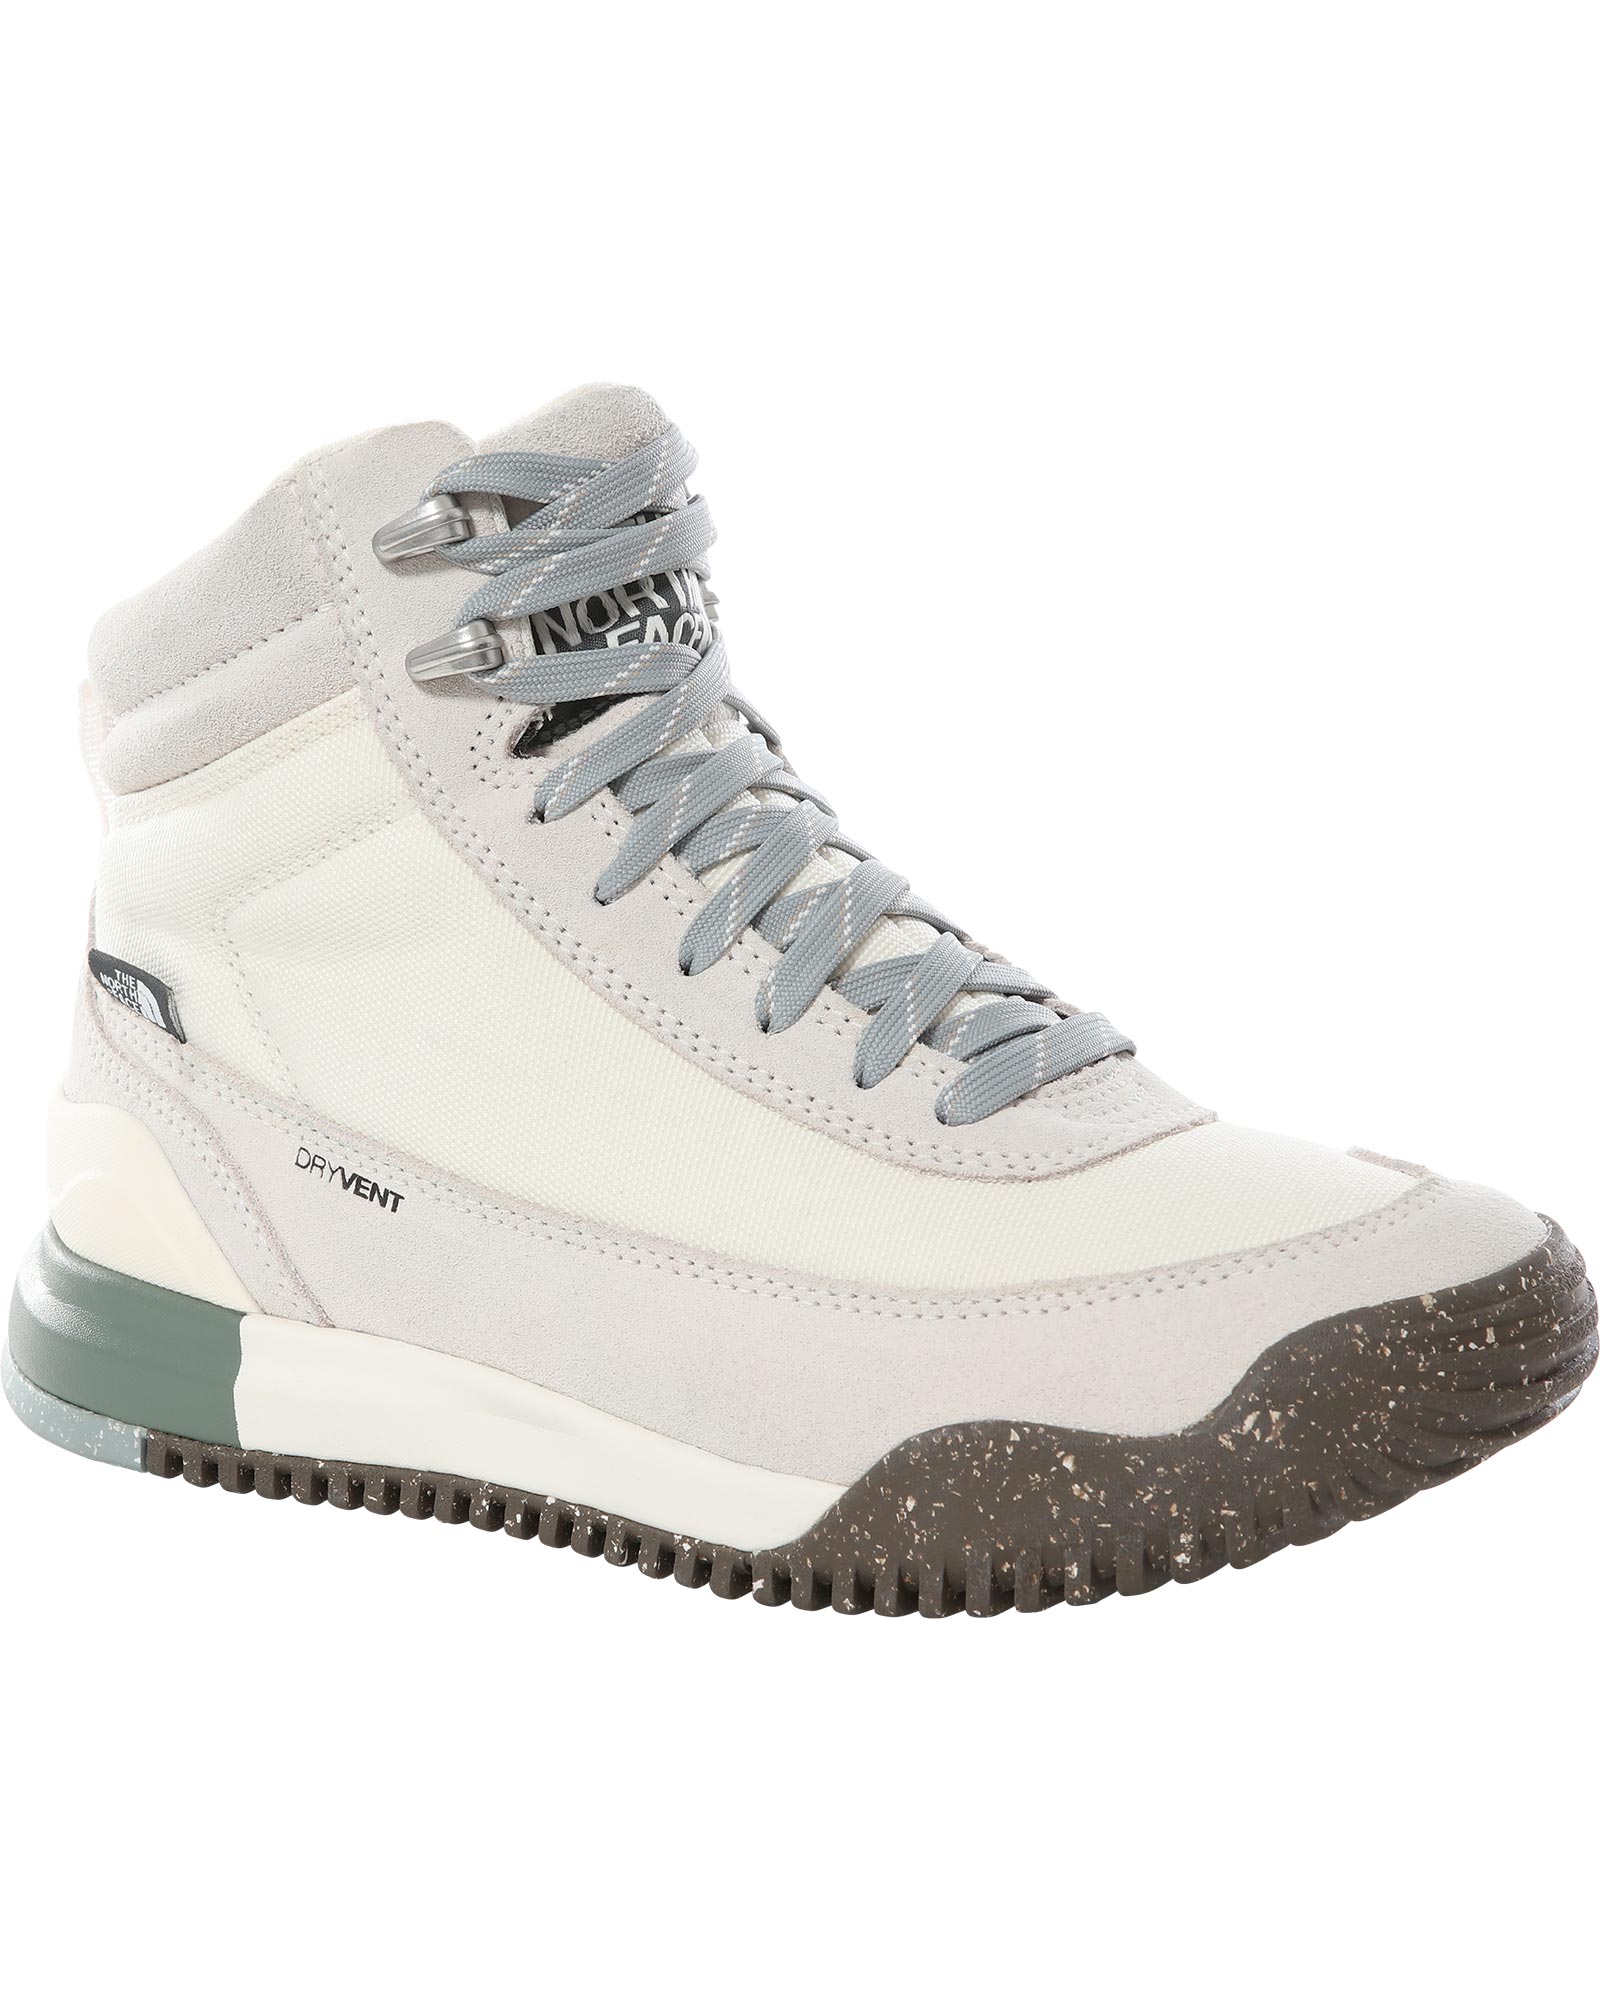 The North Face Back to Berkeley III Textile Women’s Waterproof Boots - Gardenia White/Silver Blue UK 4